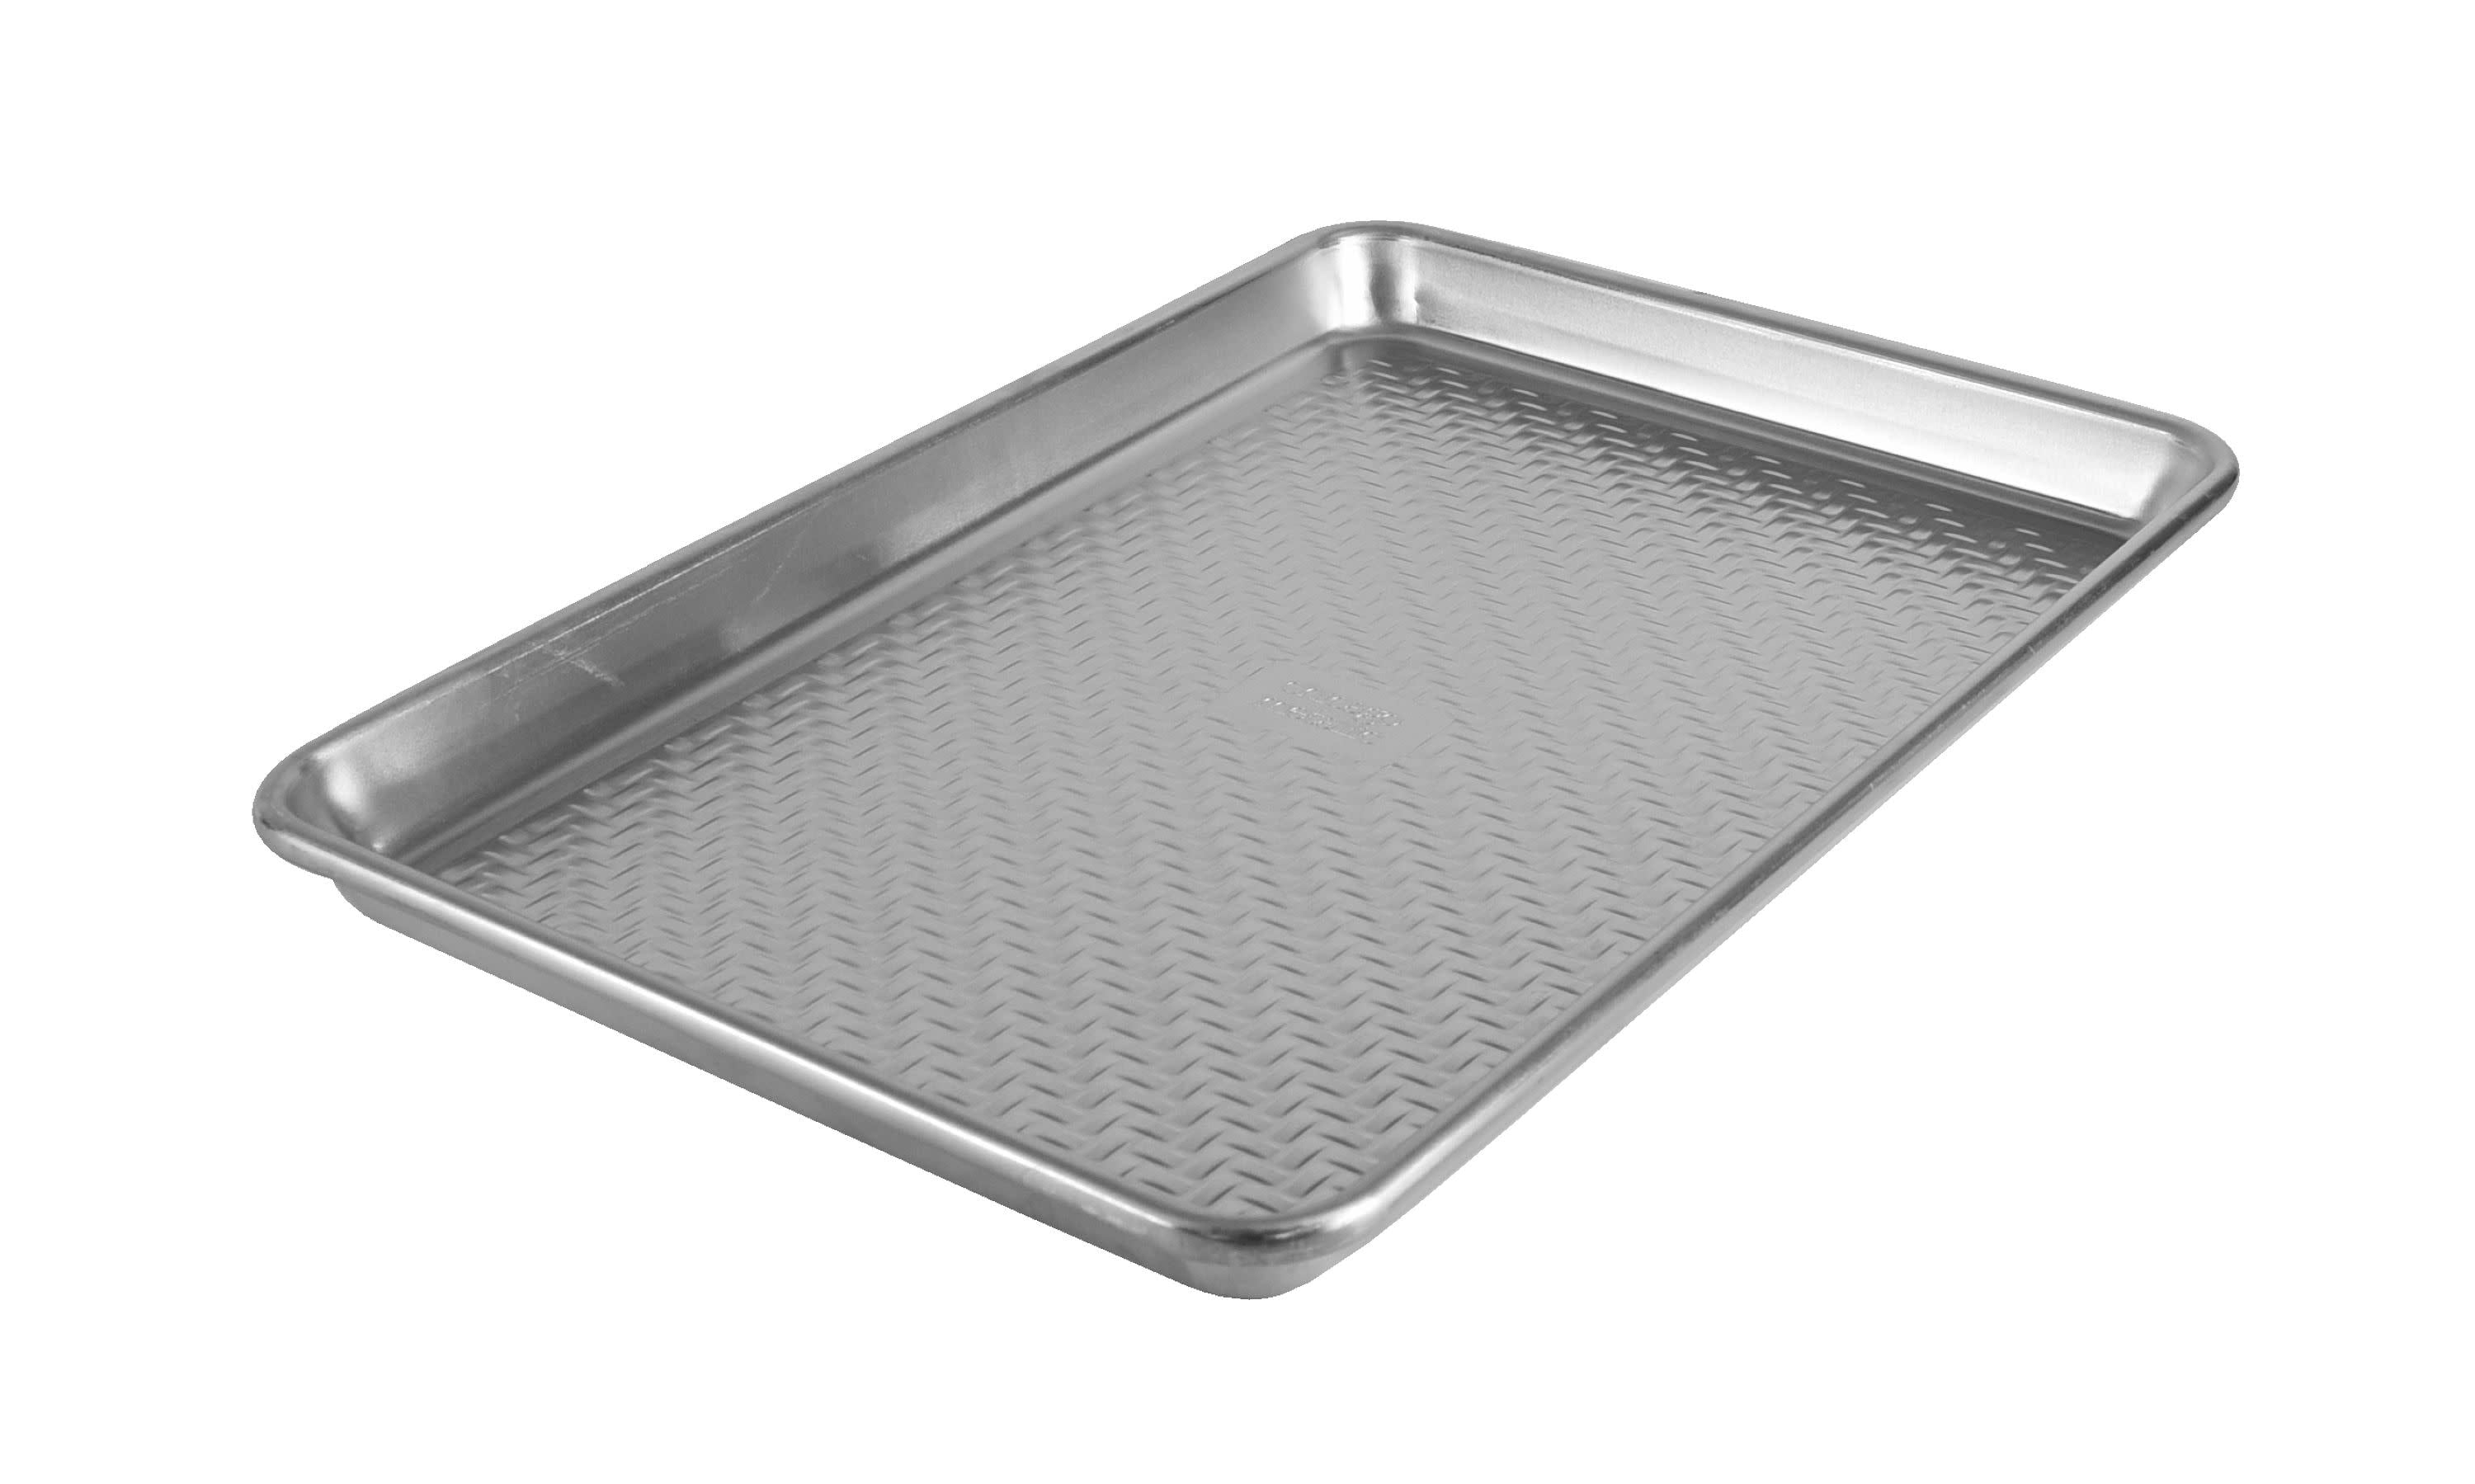 Chicago Metallic Commercial II Uncoated True Jelly Roll Pan, 15